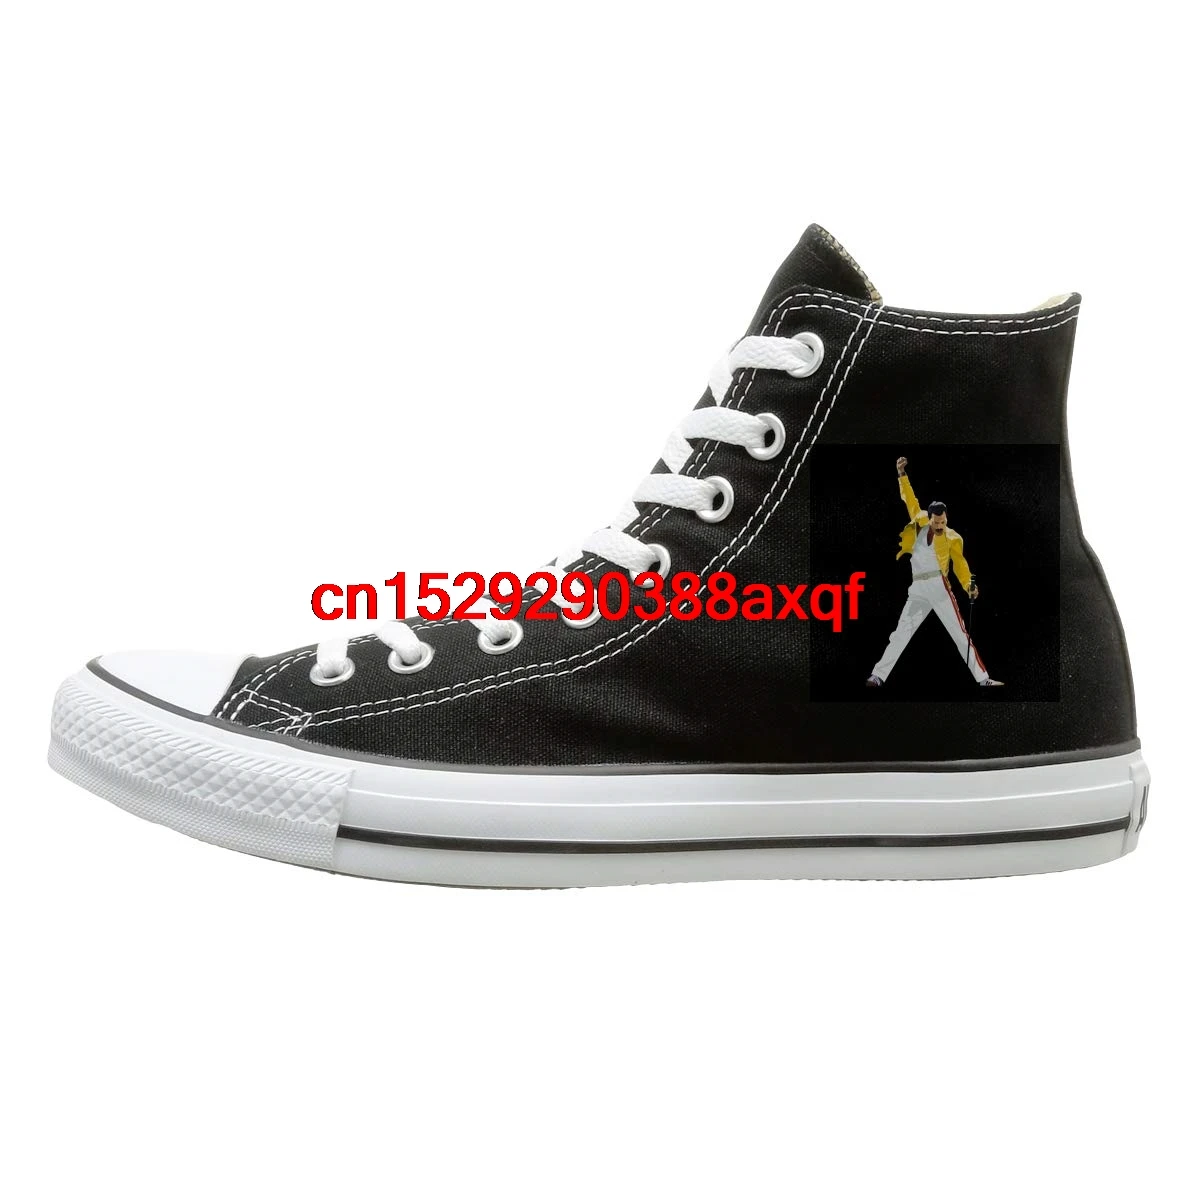 

Unisex Casual Shoes Teenagers Boys and Girls Sports Shoes Rock Band Queen Freddie Mercury High-top Canvas Shoes for Men Women